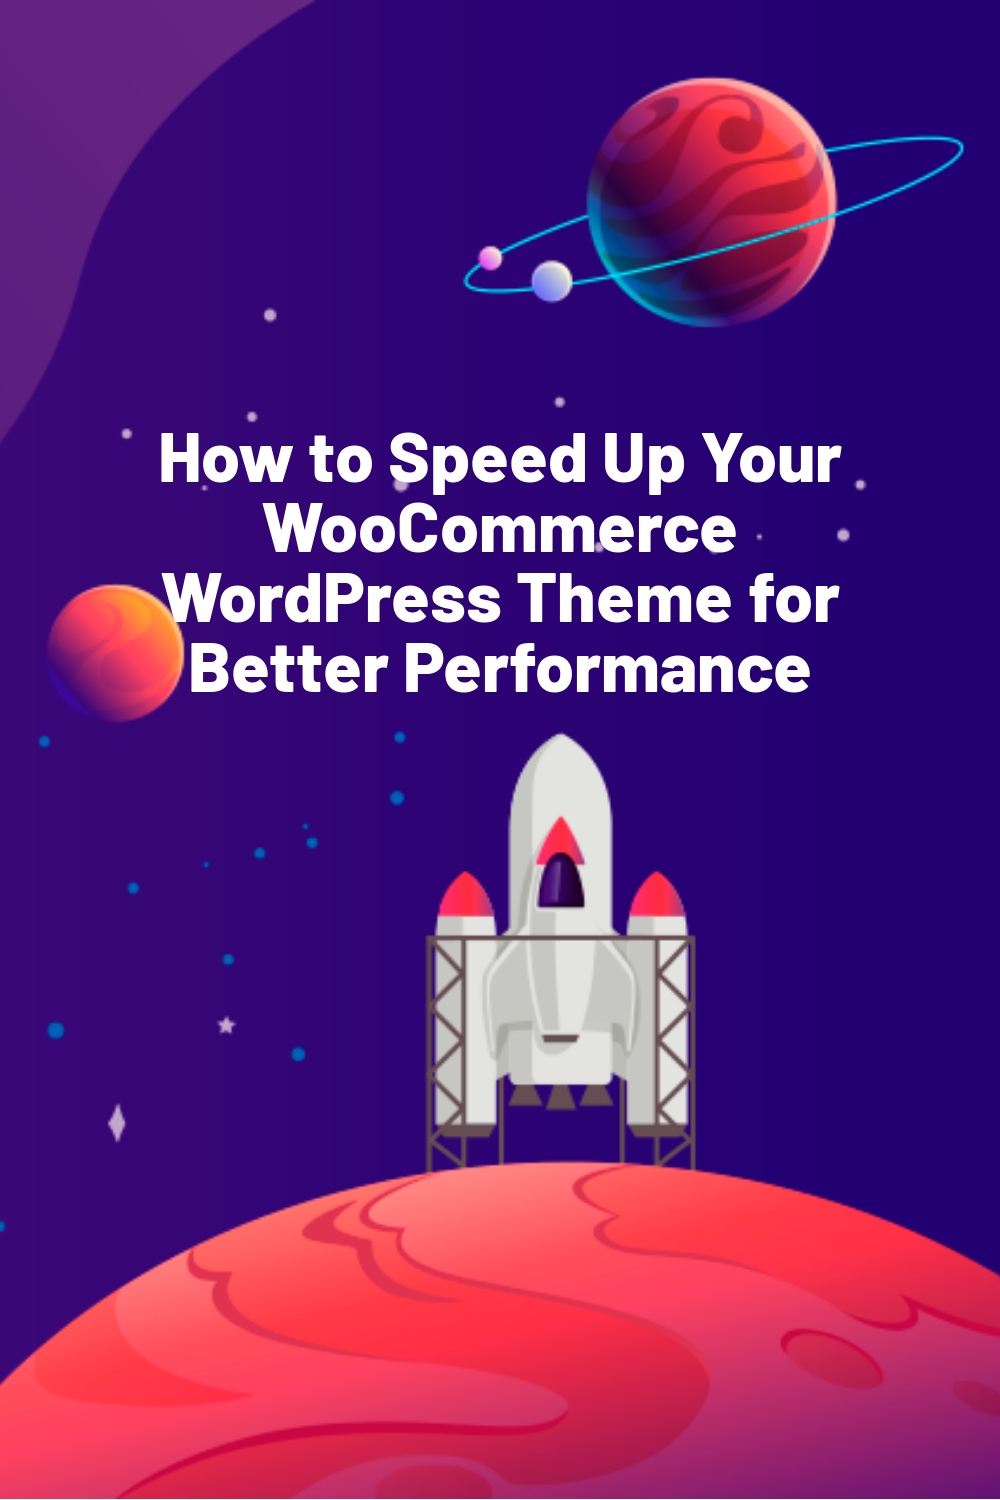 How to Speed Up Your WooCommerce WordPress Theme for Better Performance